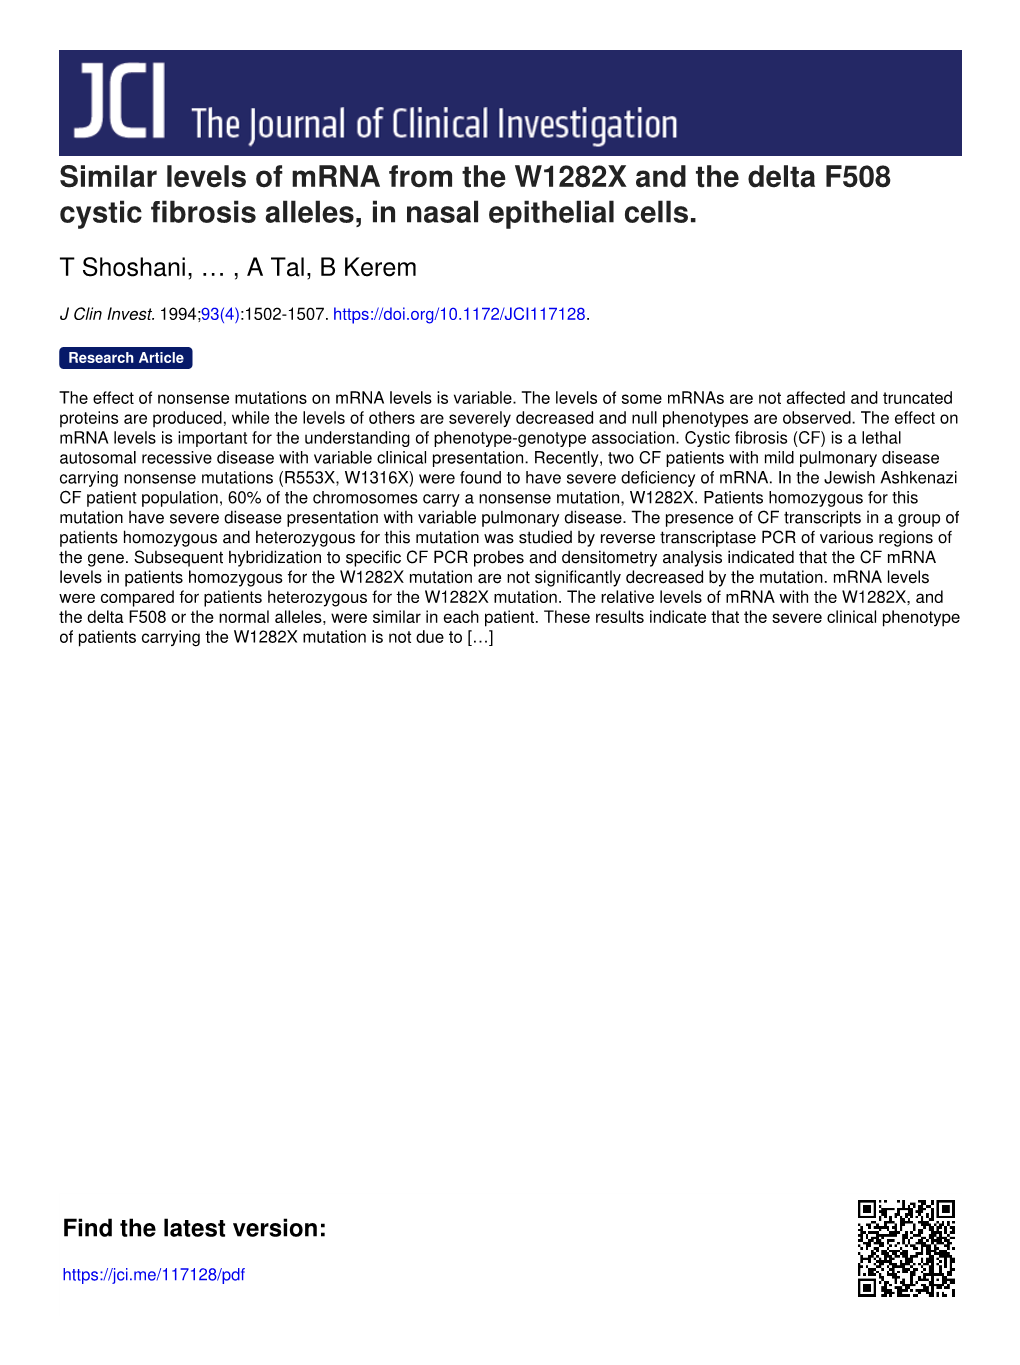 Similar Levels of Mrna from the W1282X and the Delta F508 Cystic Fibrosis Alleles, in Nasal Epithelial Cells